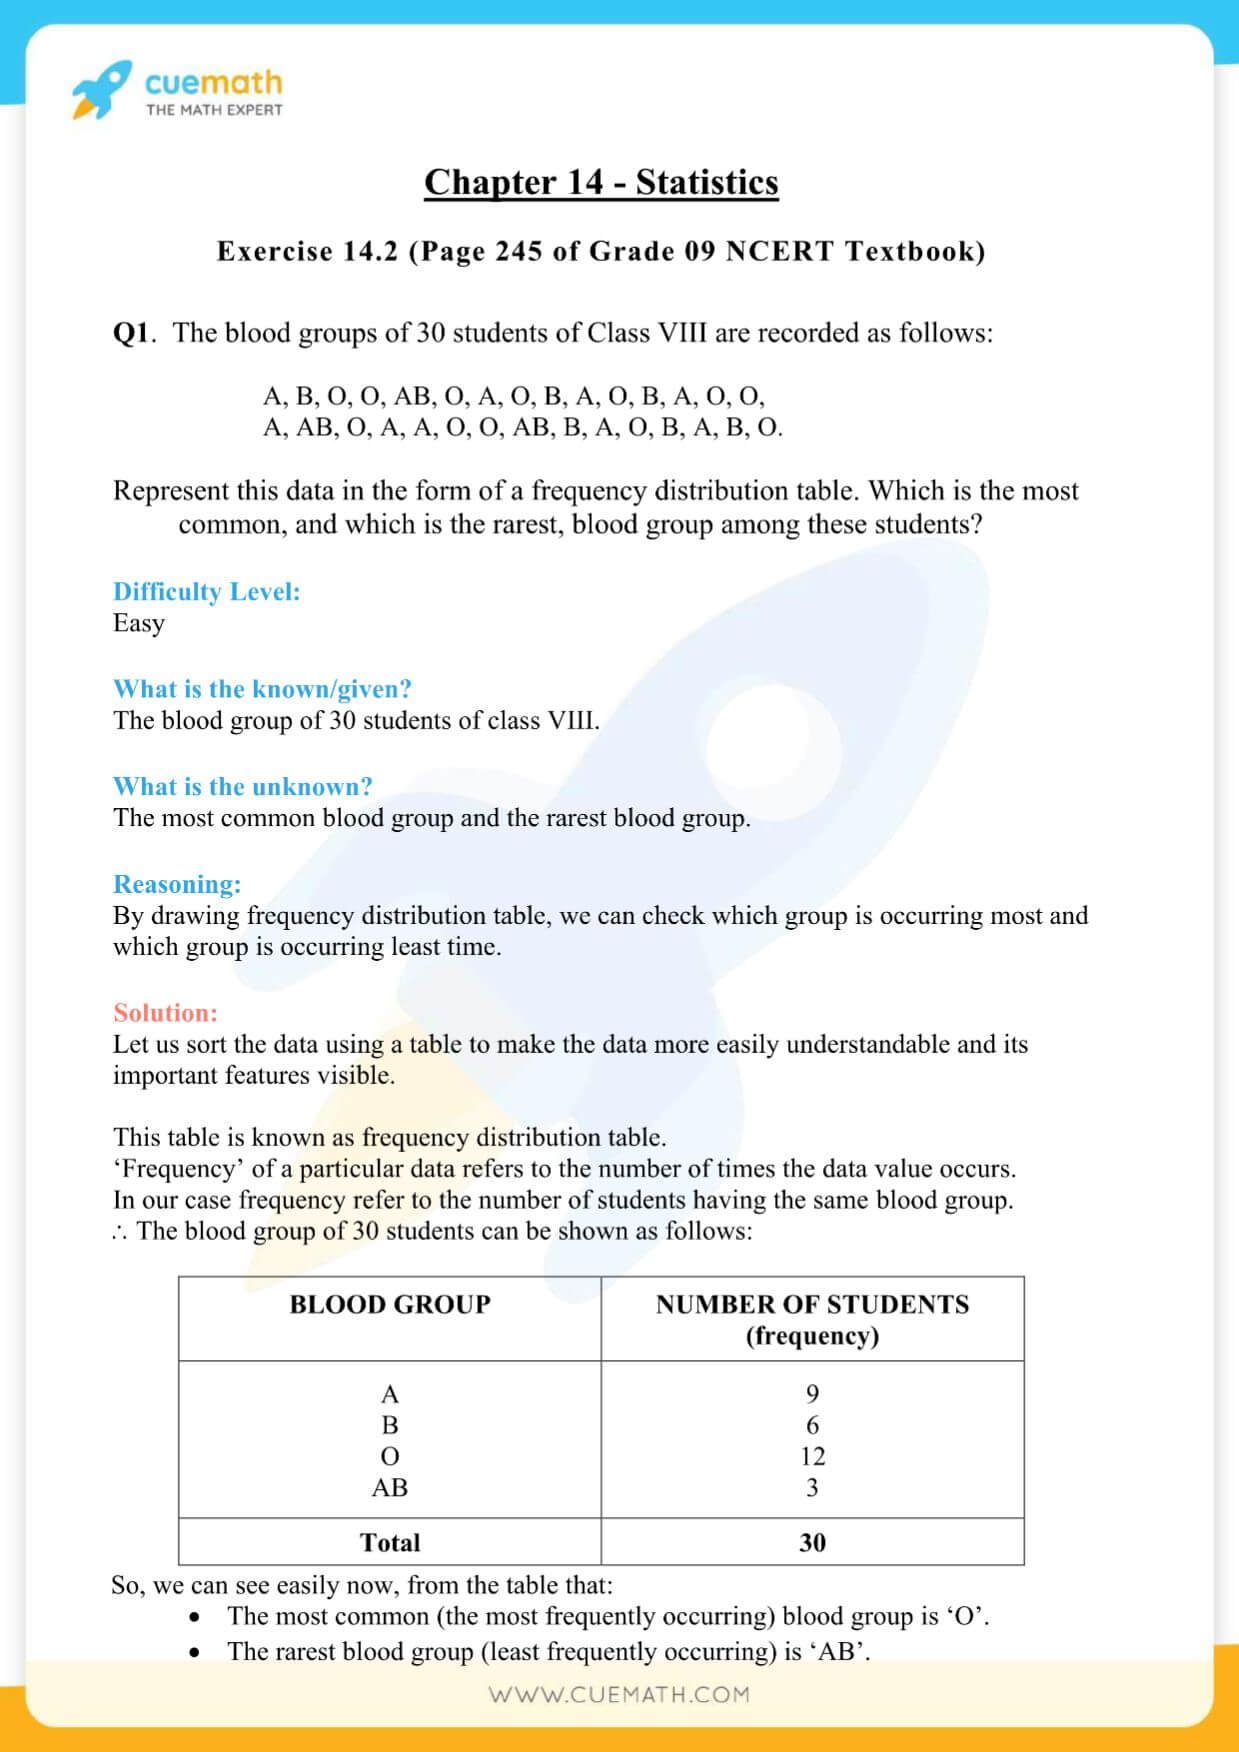 NCERT Solutions Class 9 Math Chapter 14 Exercise 14.2 2